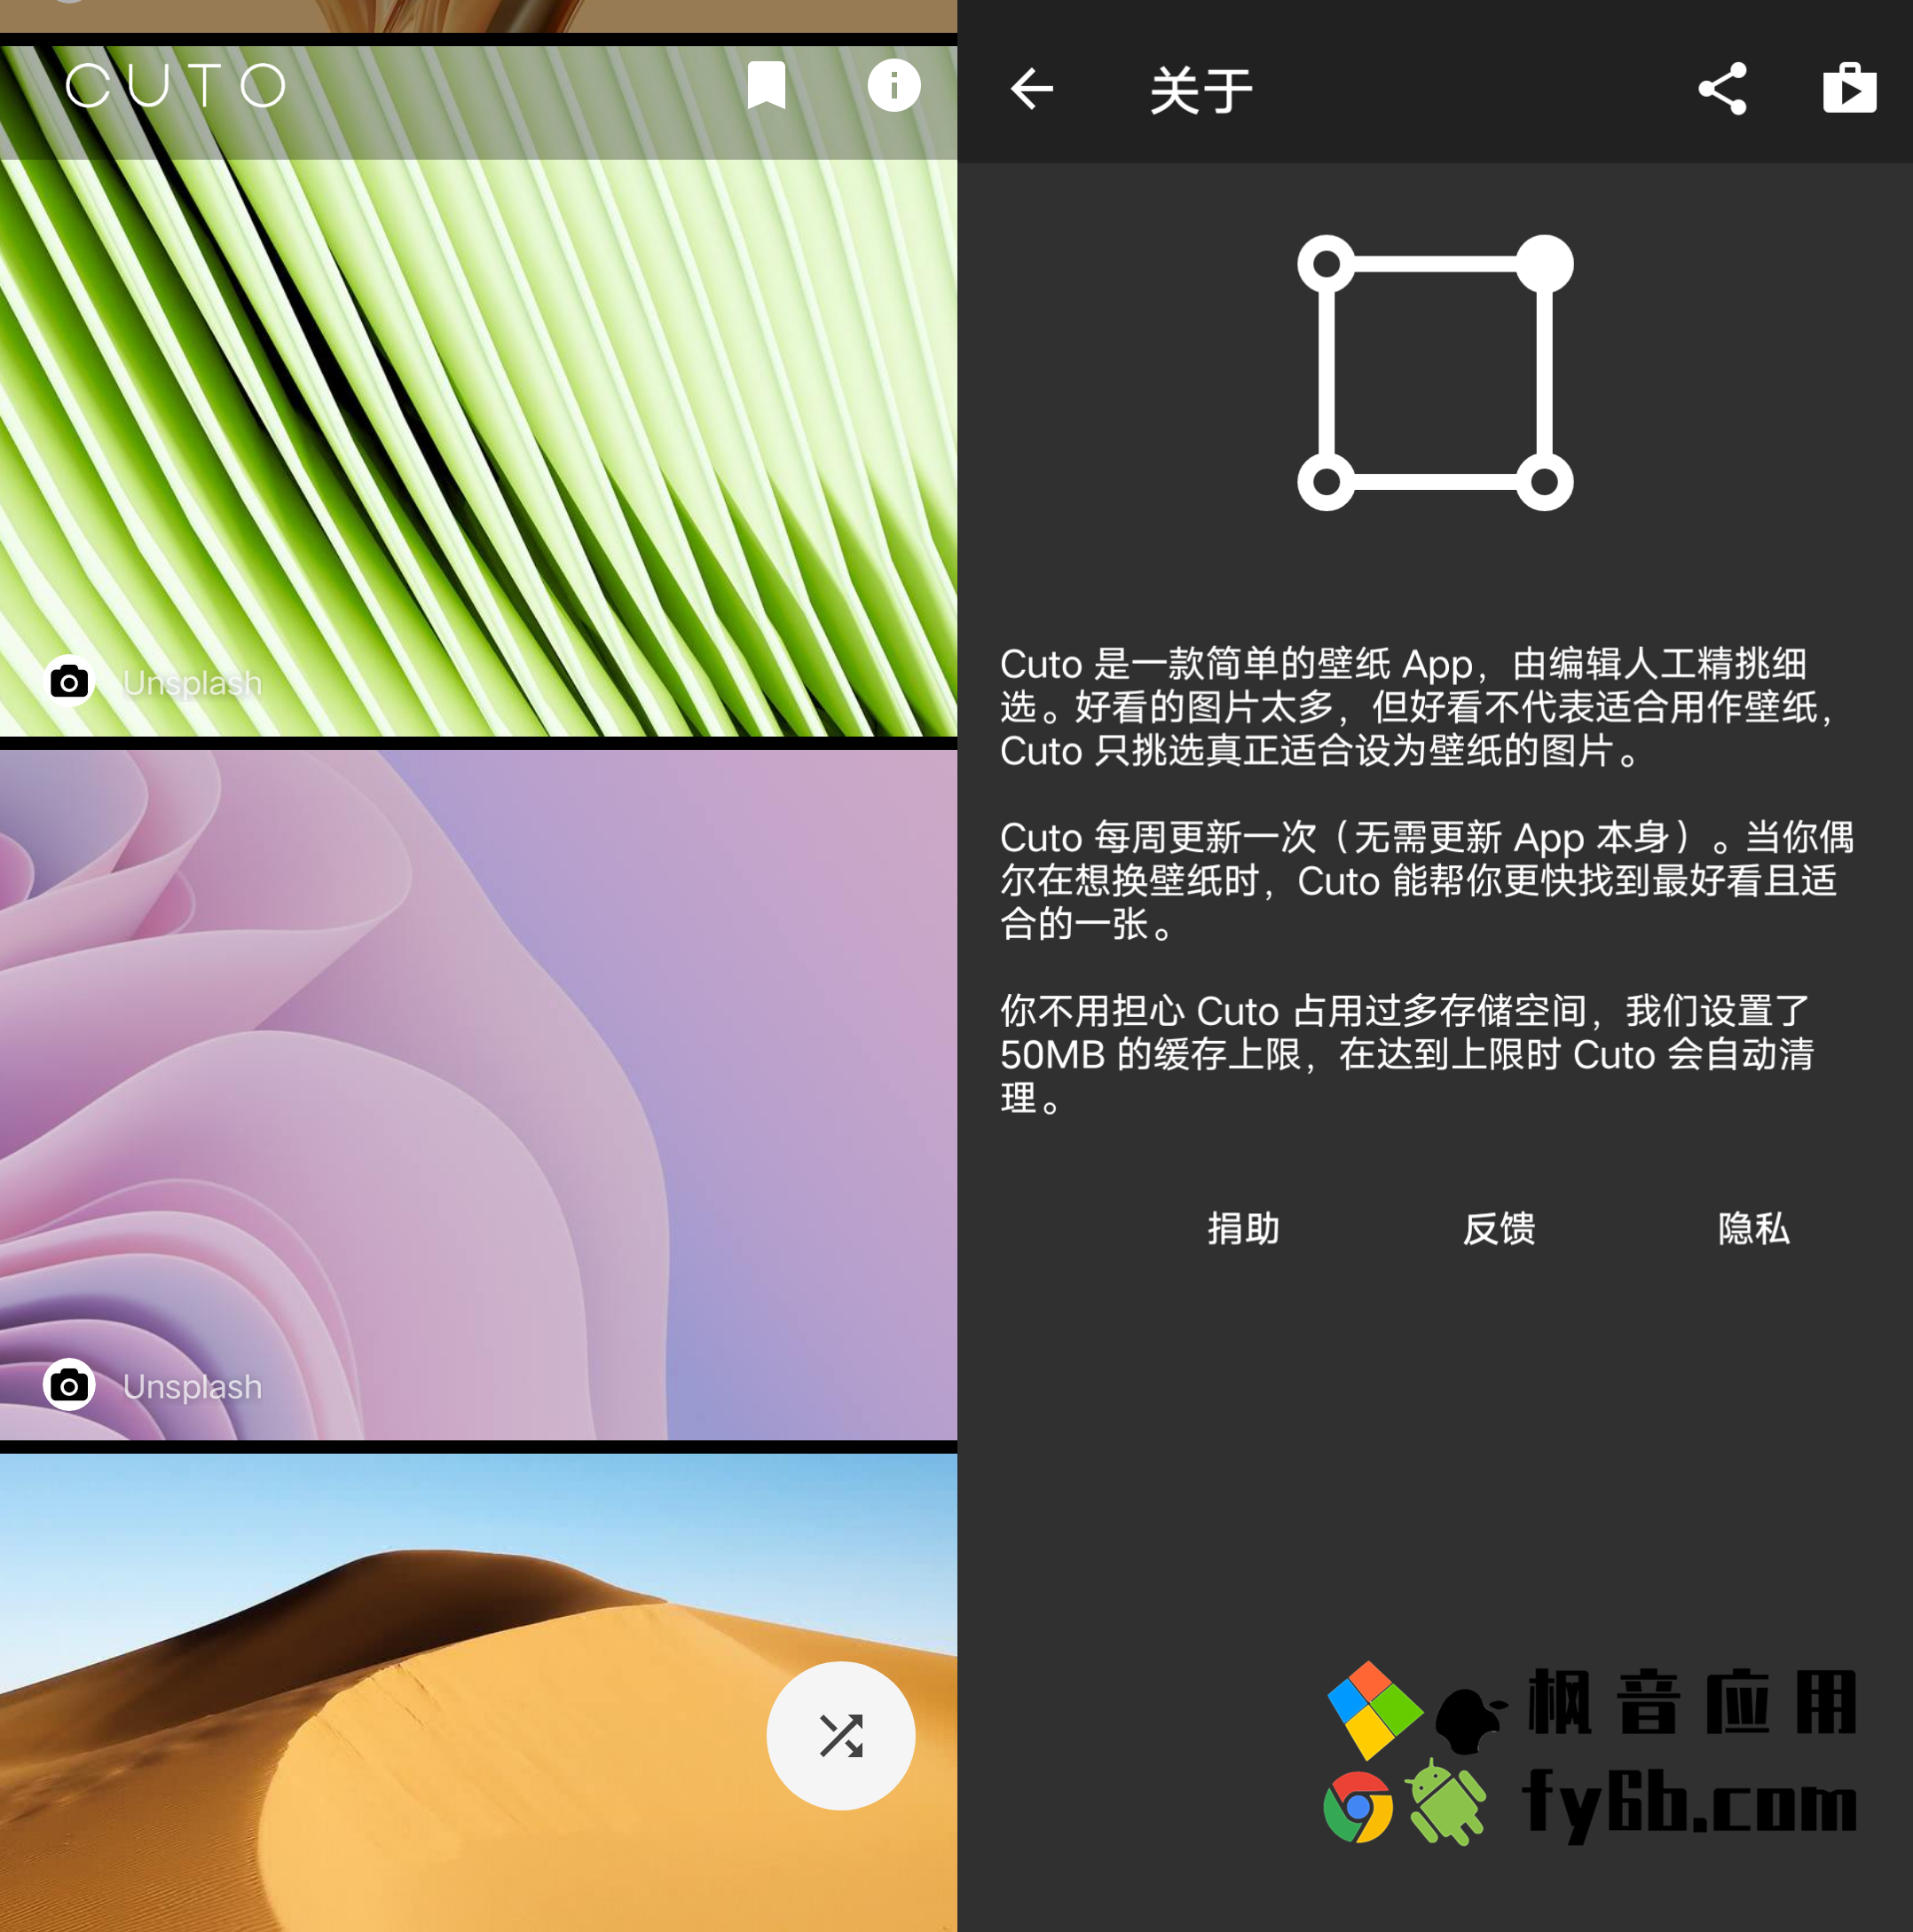 Android Cuto简约壁纸_1.6.4